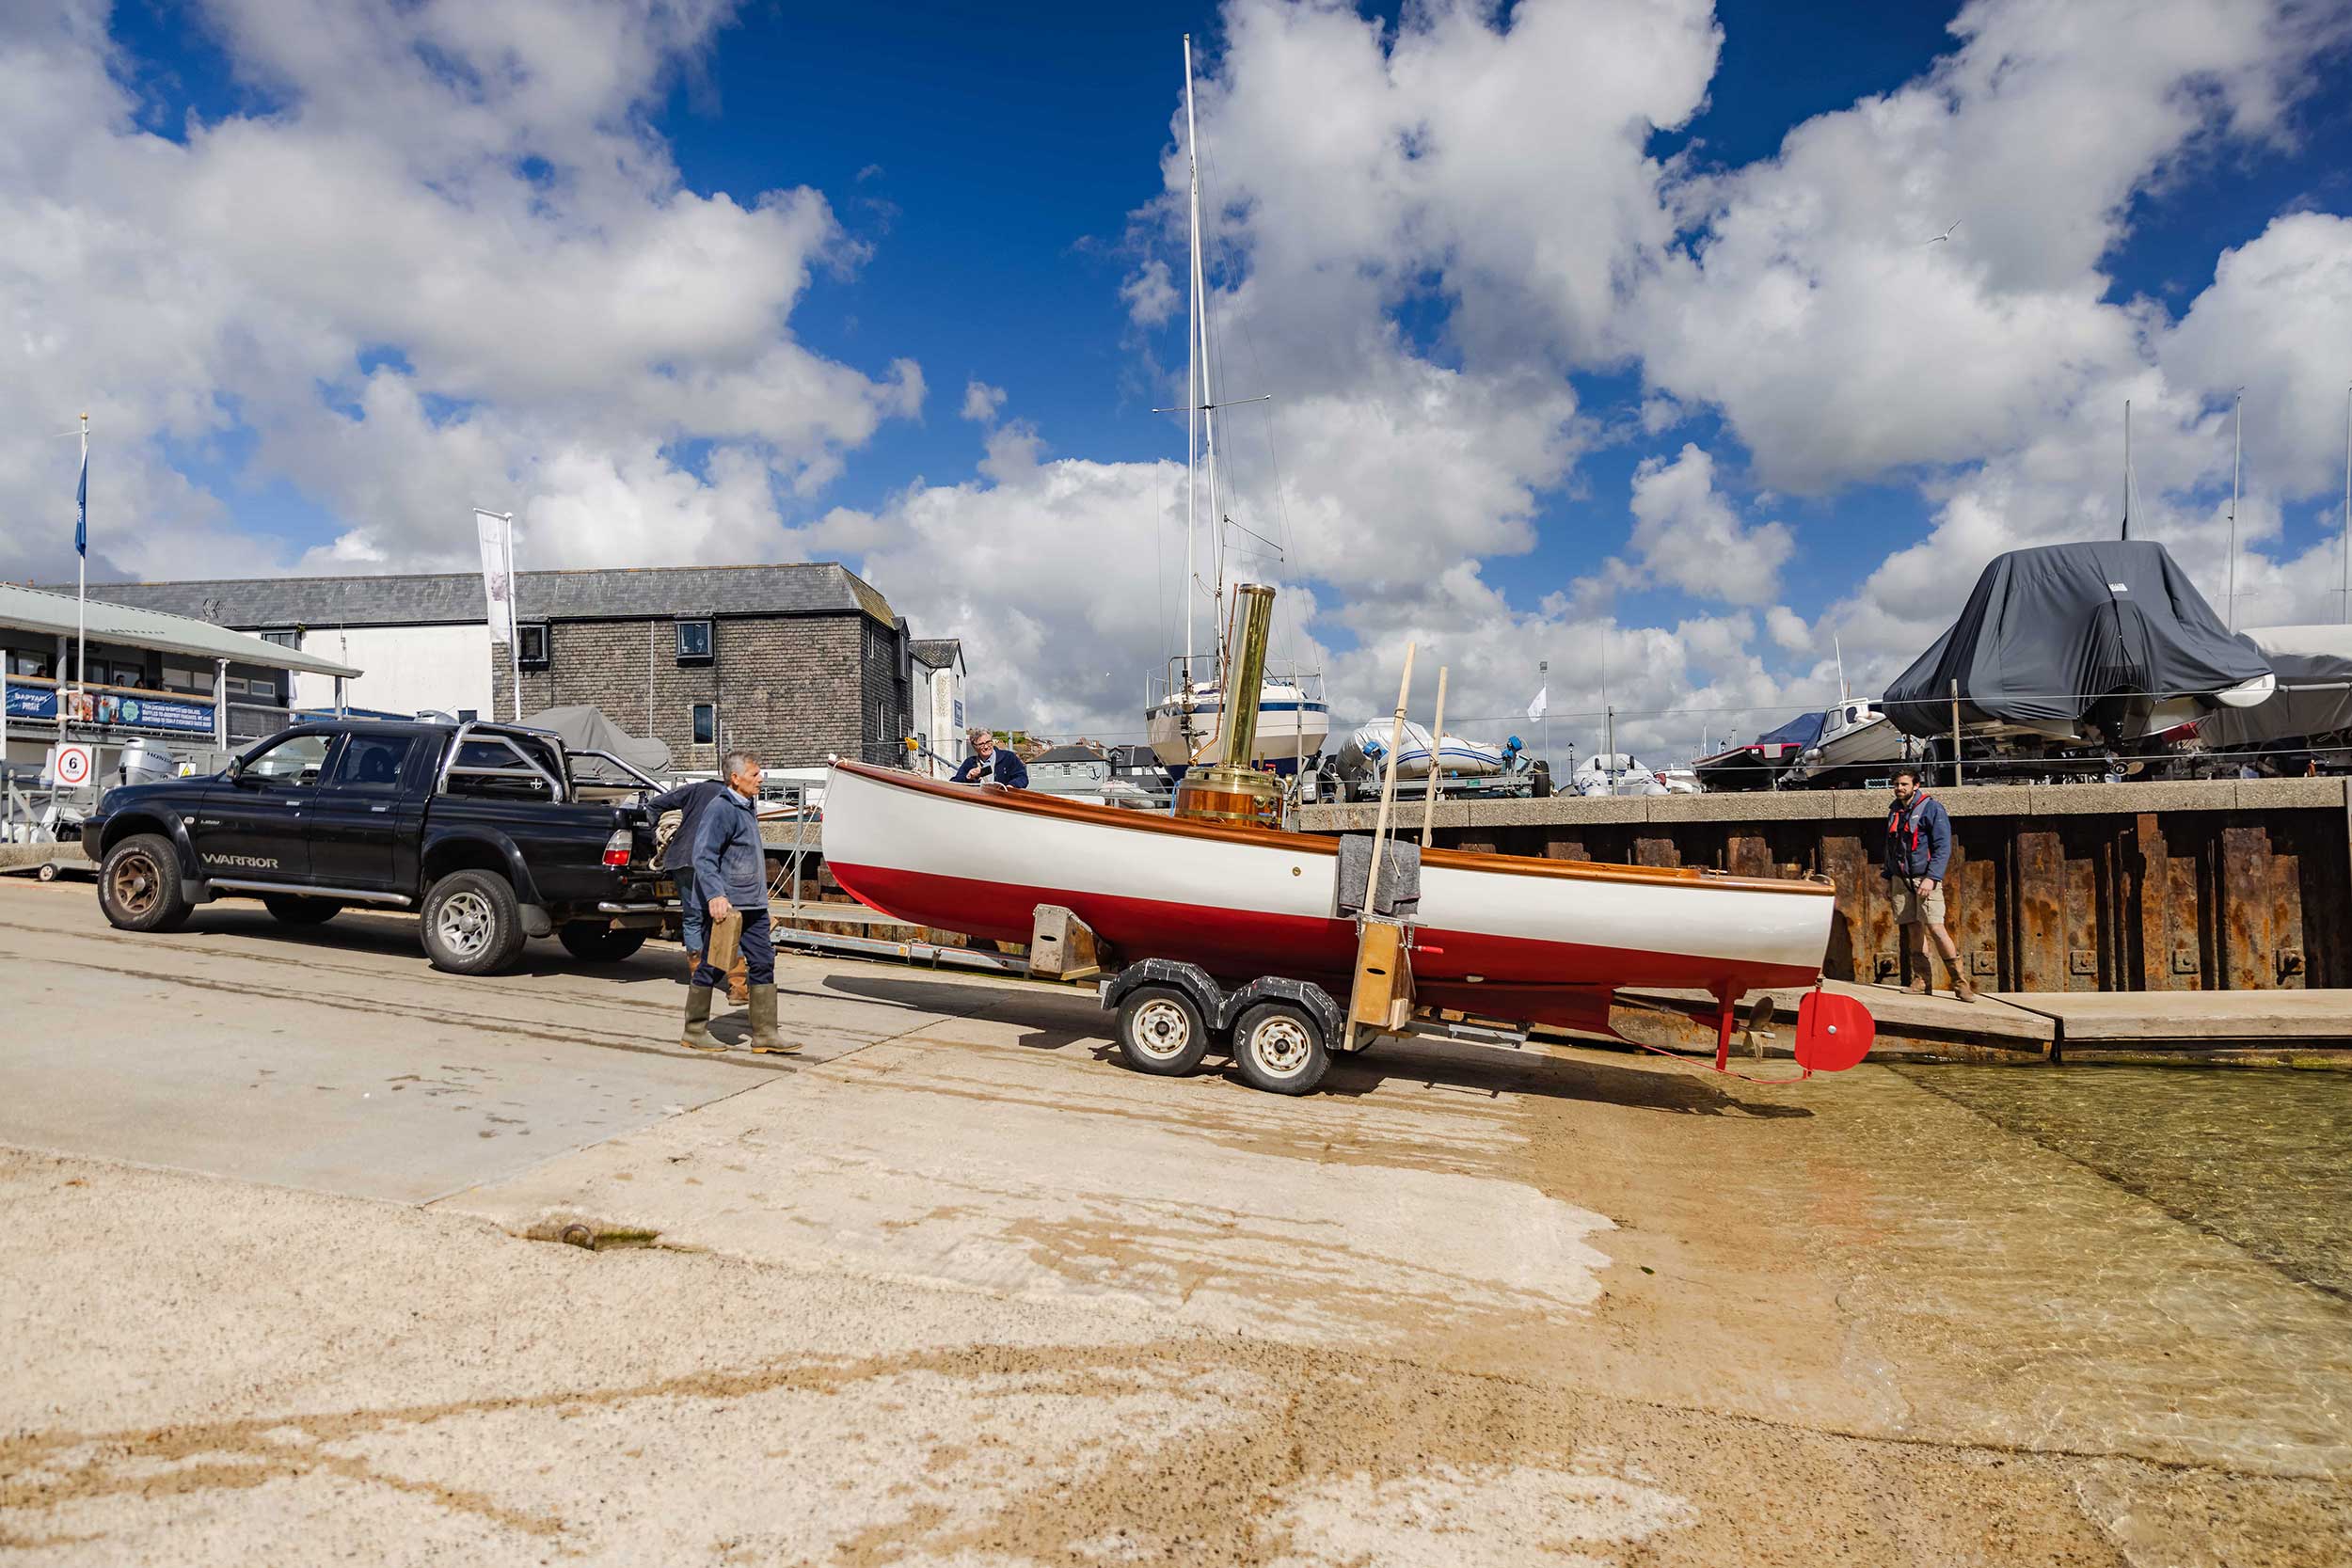 The steam launch 'Emma' is wheeled down a slipway by a 4X4 while on a trailer.